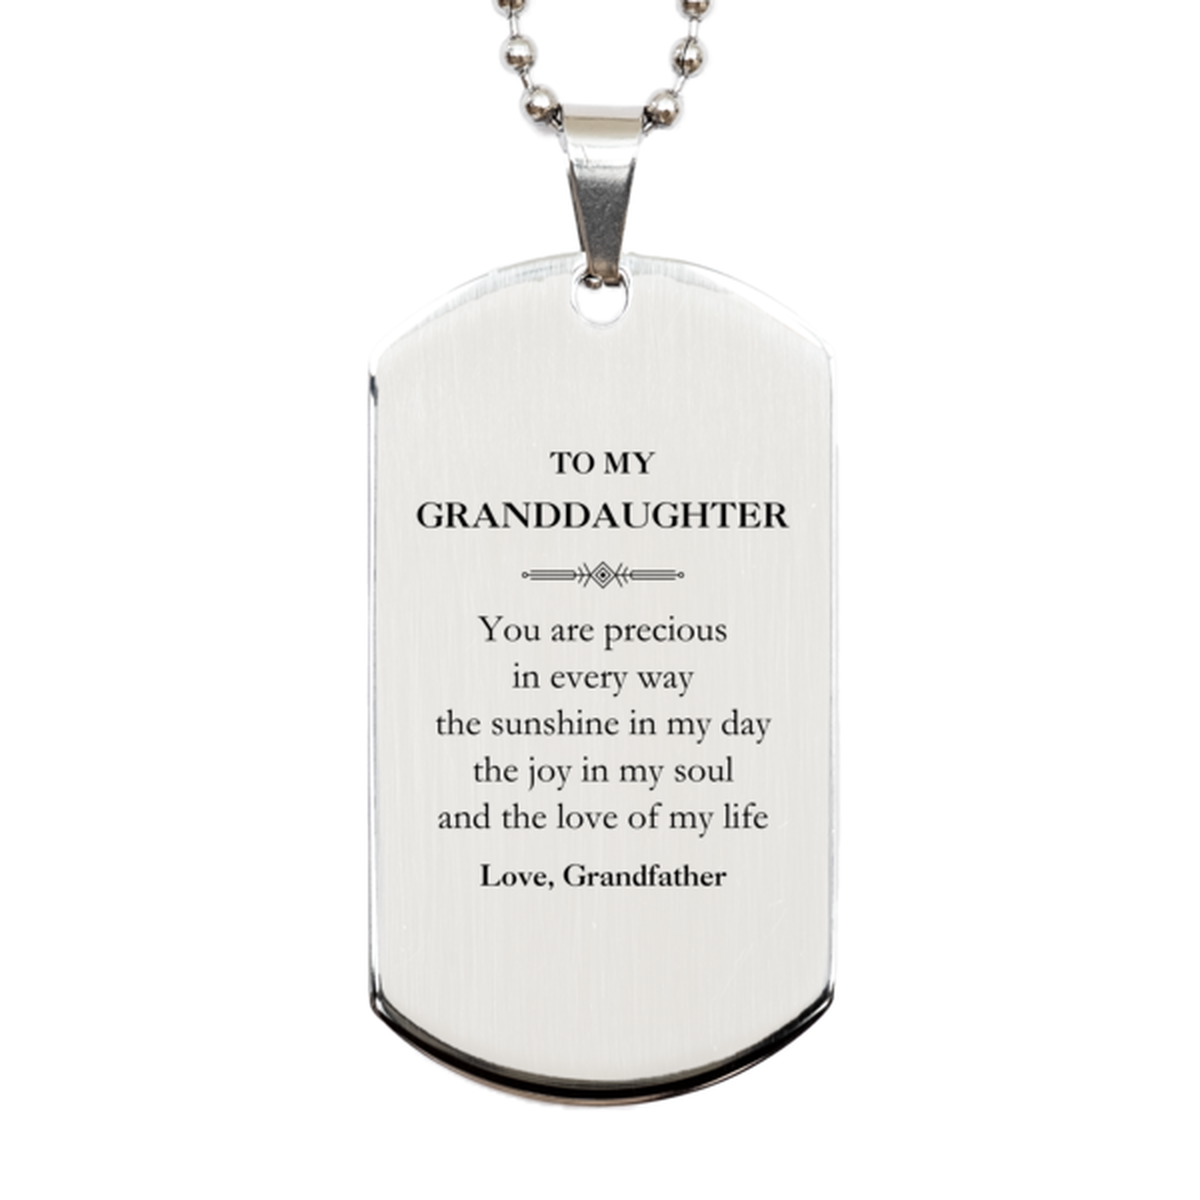 Graduation Gifts for Granddaughter Silver Dog Tag Present from Grandfather, Christmas Granddaughter Birthday Gifts Granddaughter You are precious in every way the sunshine in my day. Love, Grandfather